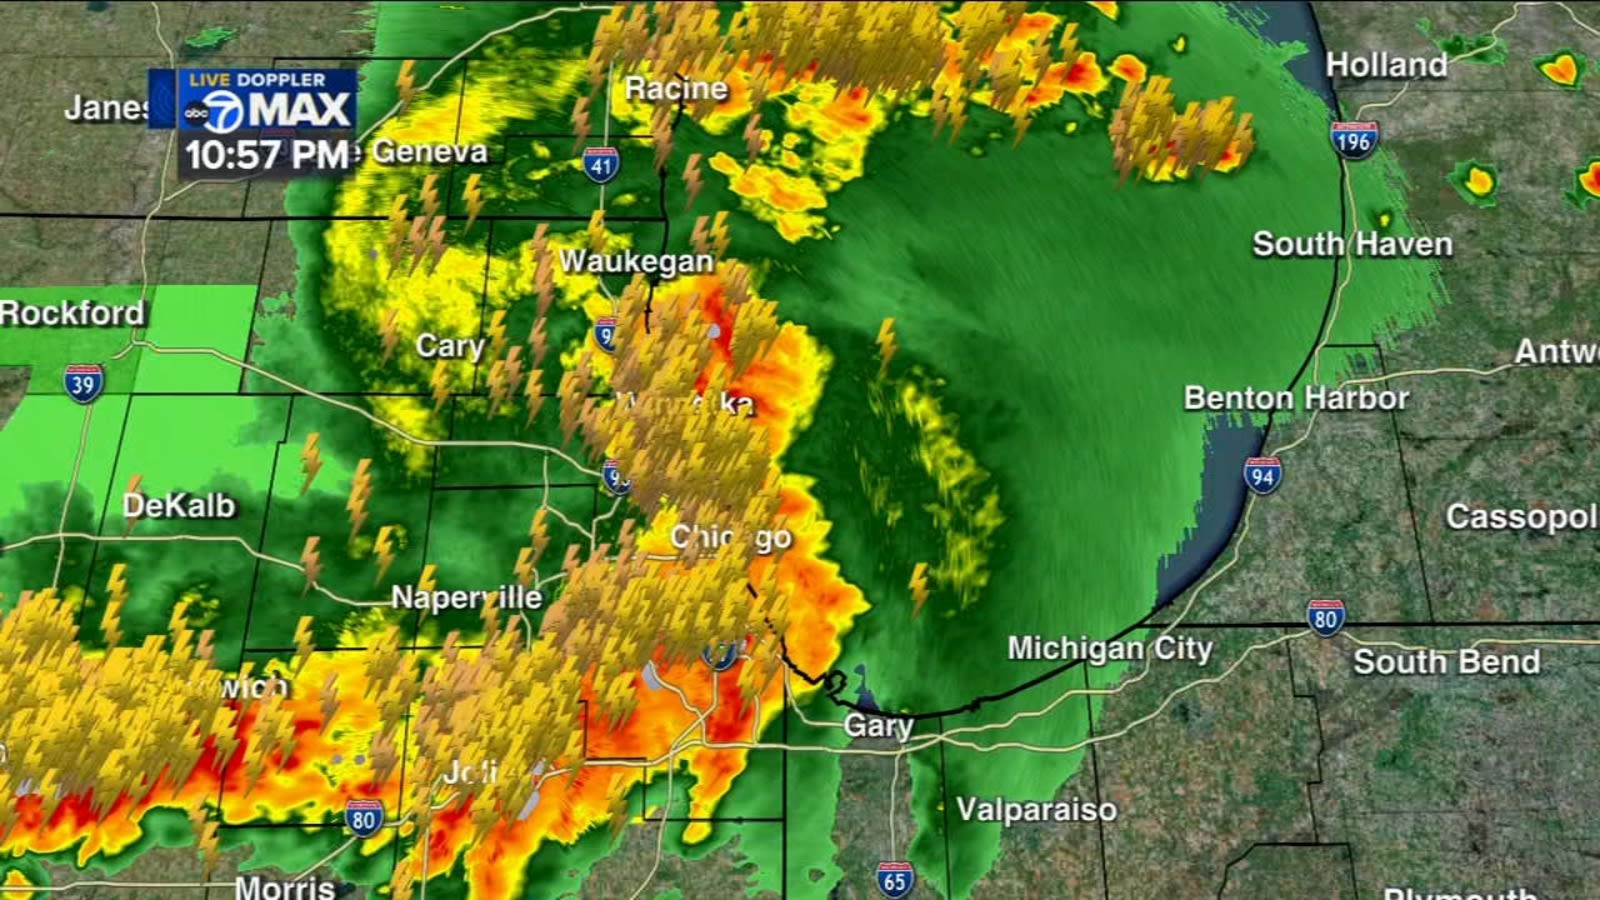 Chicago weather: Severe storms move across area